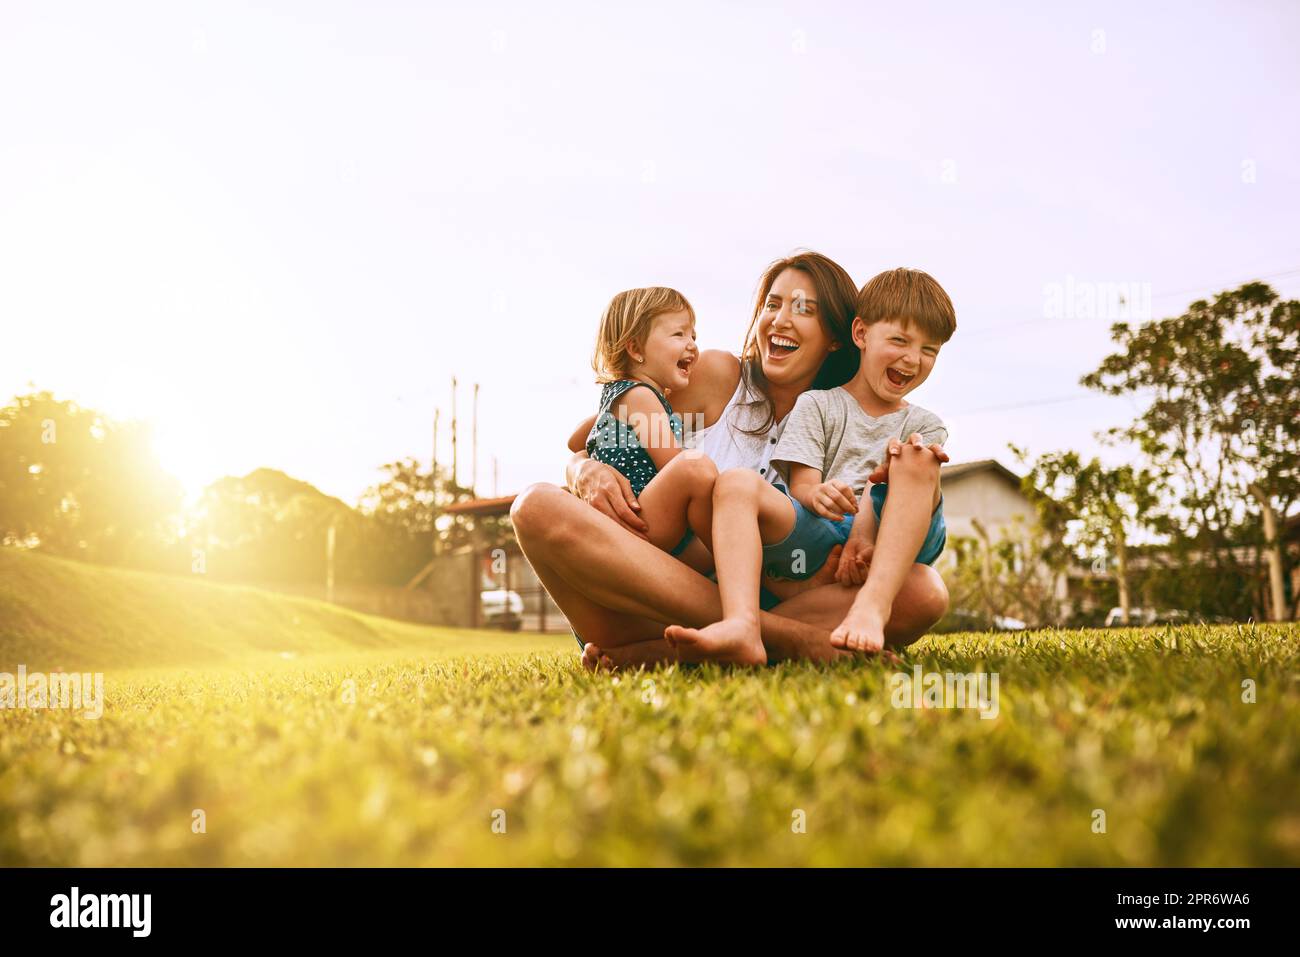 Her boys fill her life with joy. Cropped shot of a young family spending time together outdoors. Stock Photo